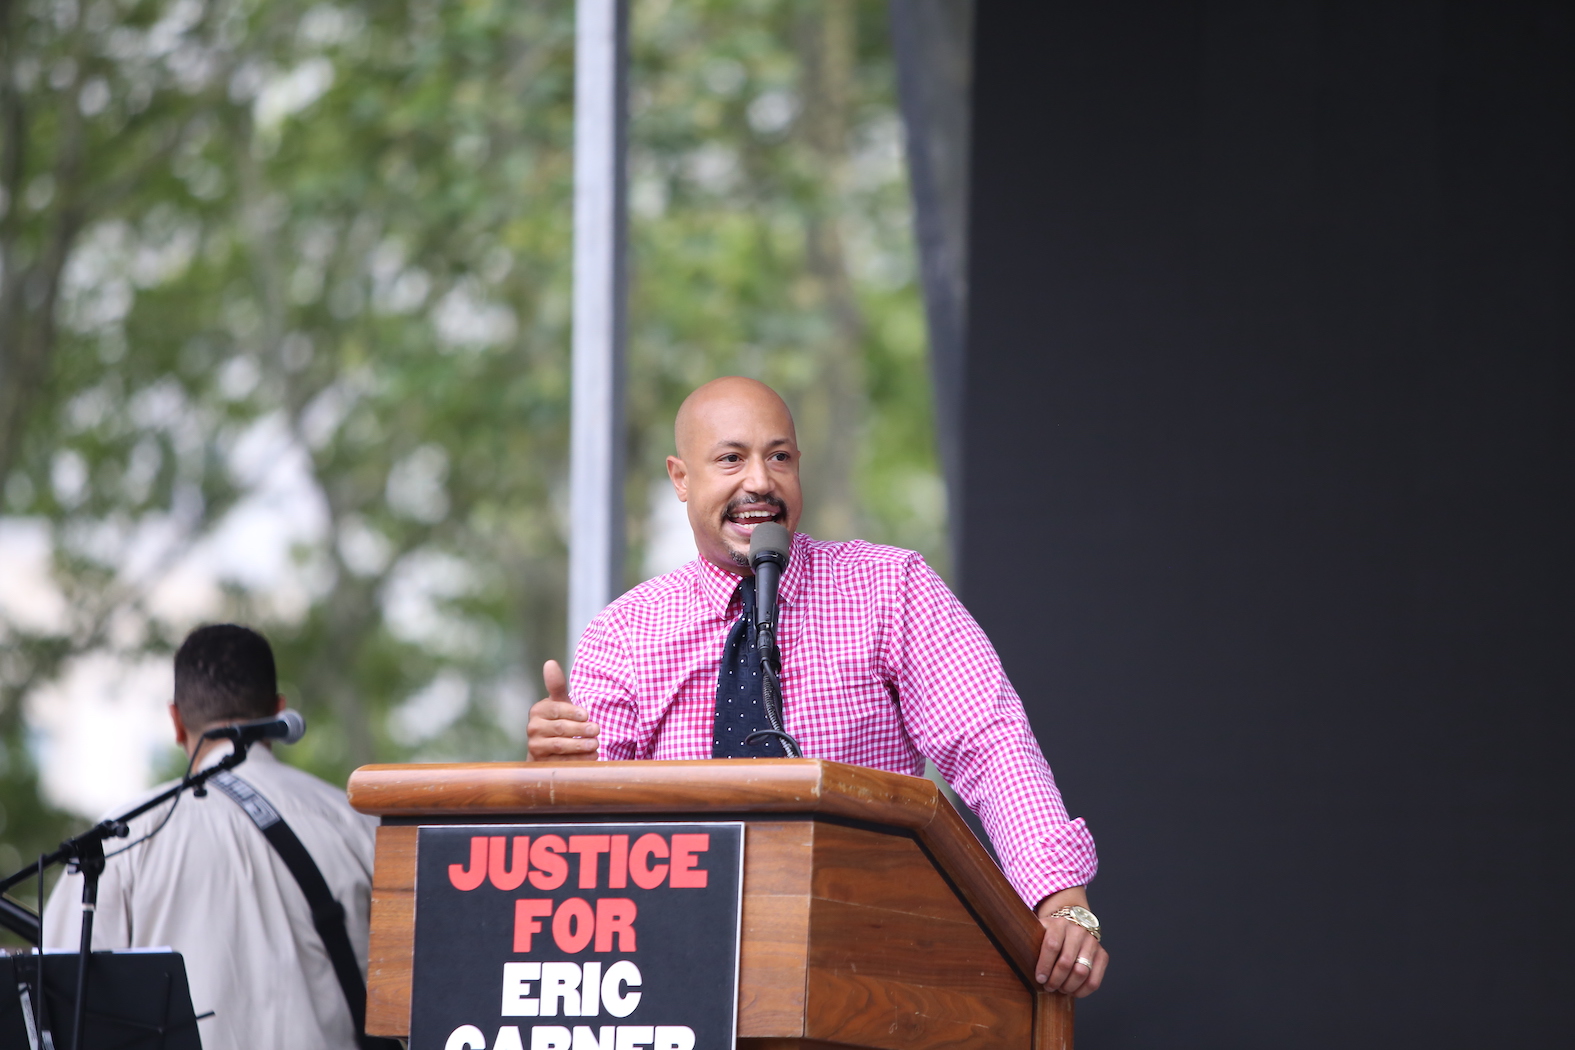 Arc of Justice founder Kirsten John Foy at a rally marking the anniversary of Eric Garner's death in 2015.